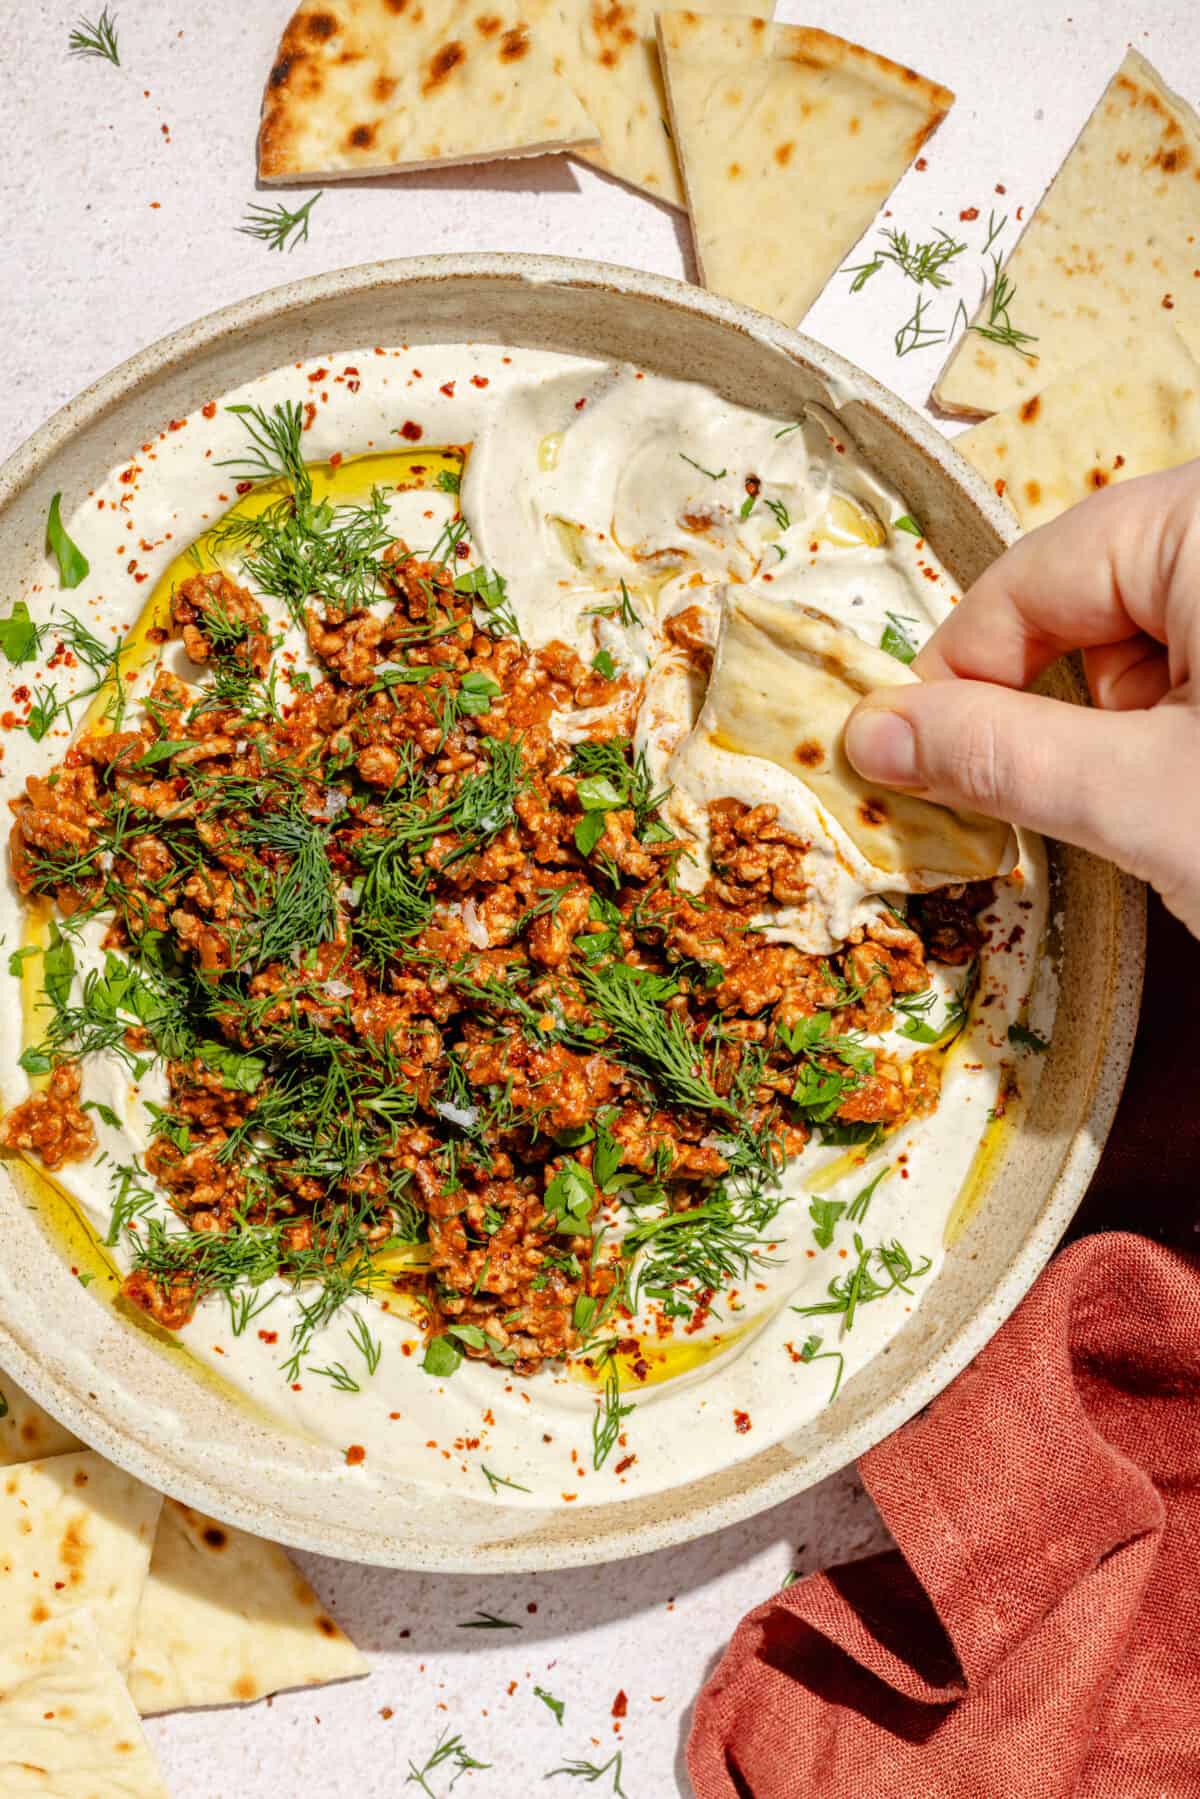 Spicy Lamb and Eggplant Labneh in a low bowl. Hand dipping pita into bowl.